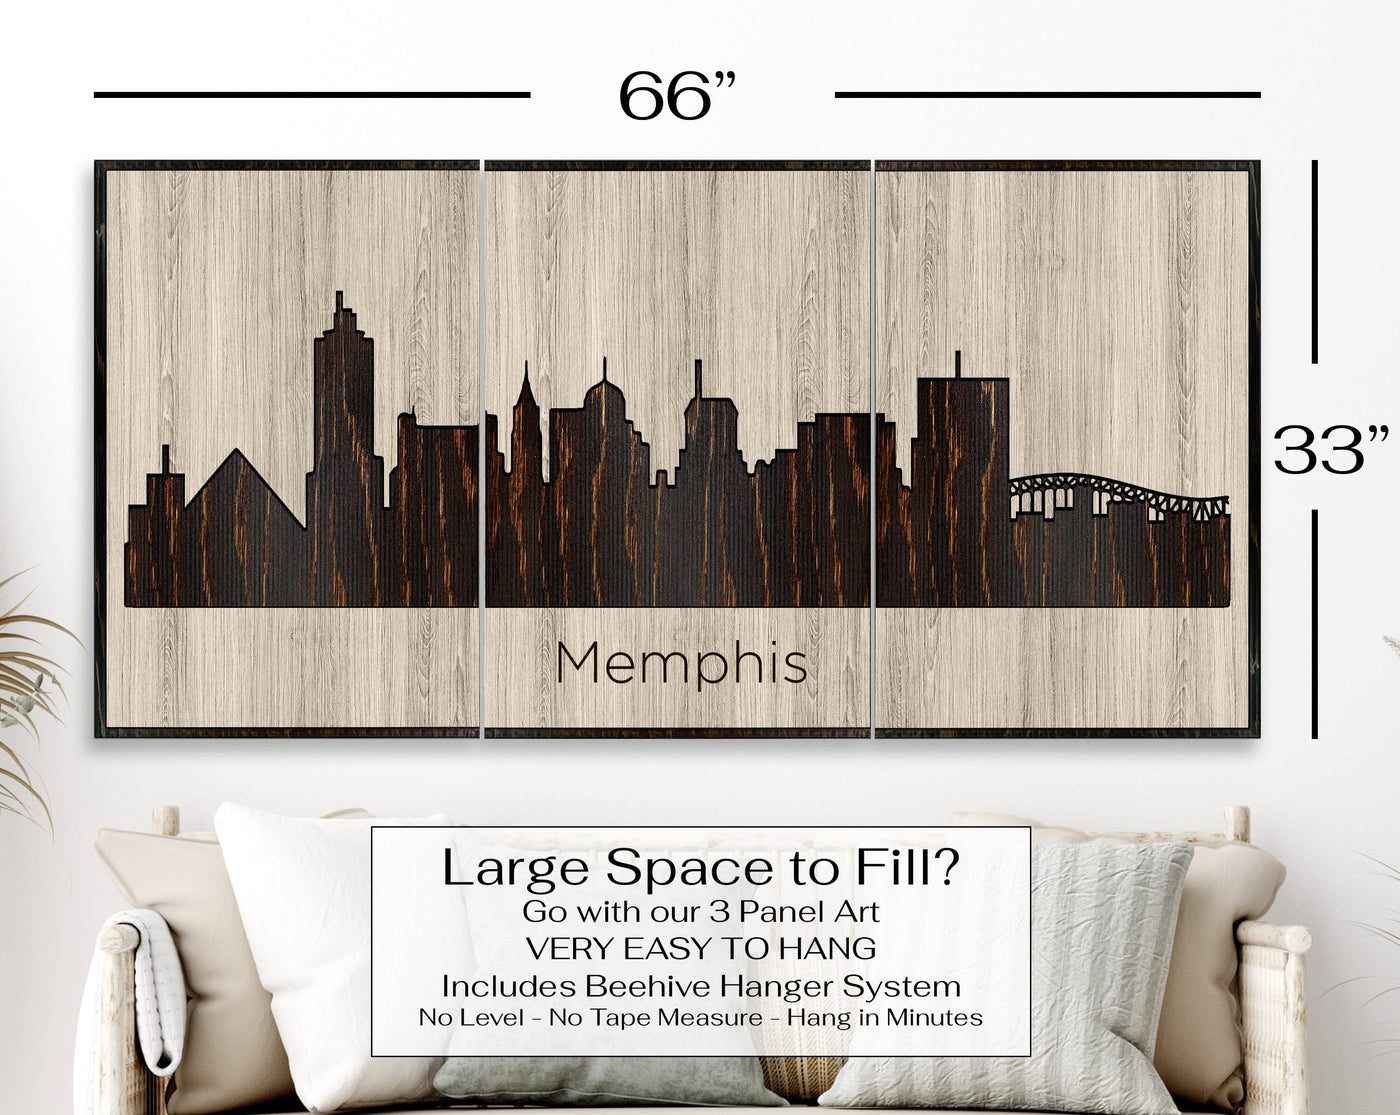 Memphis Tennessee City Skyline Custom Wood Wall Art Carved with CNC Machine